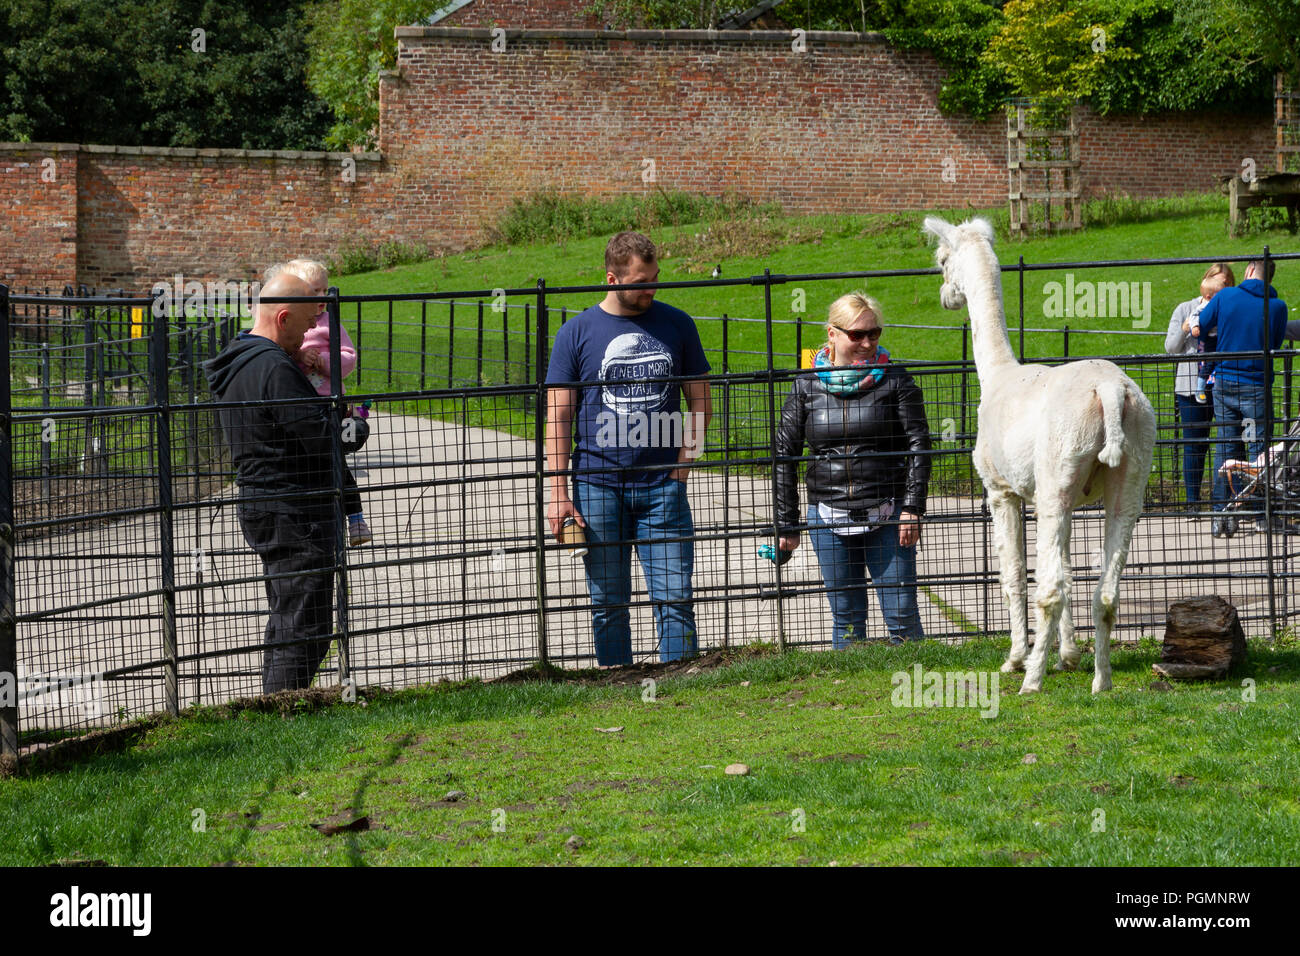 The Stables Animal Centre in Heaton Park, Prestwich, England. Stock Photo